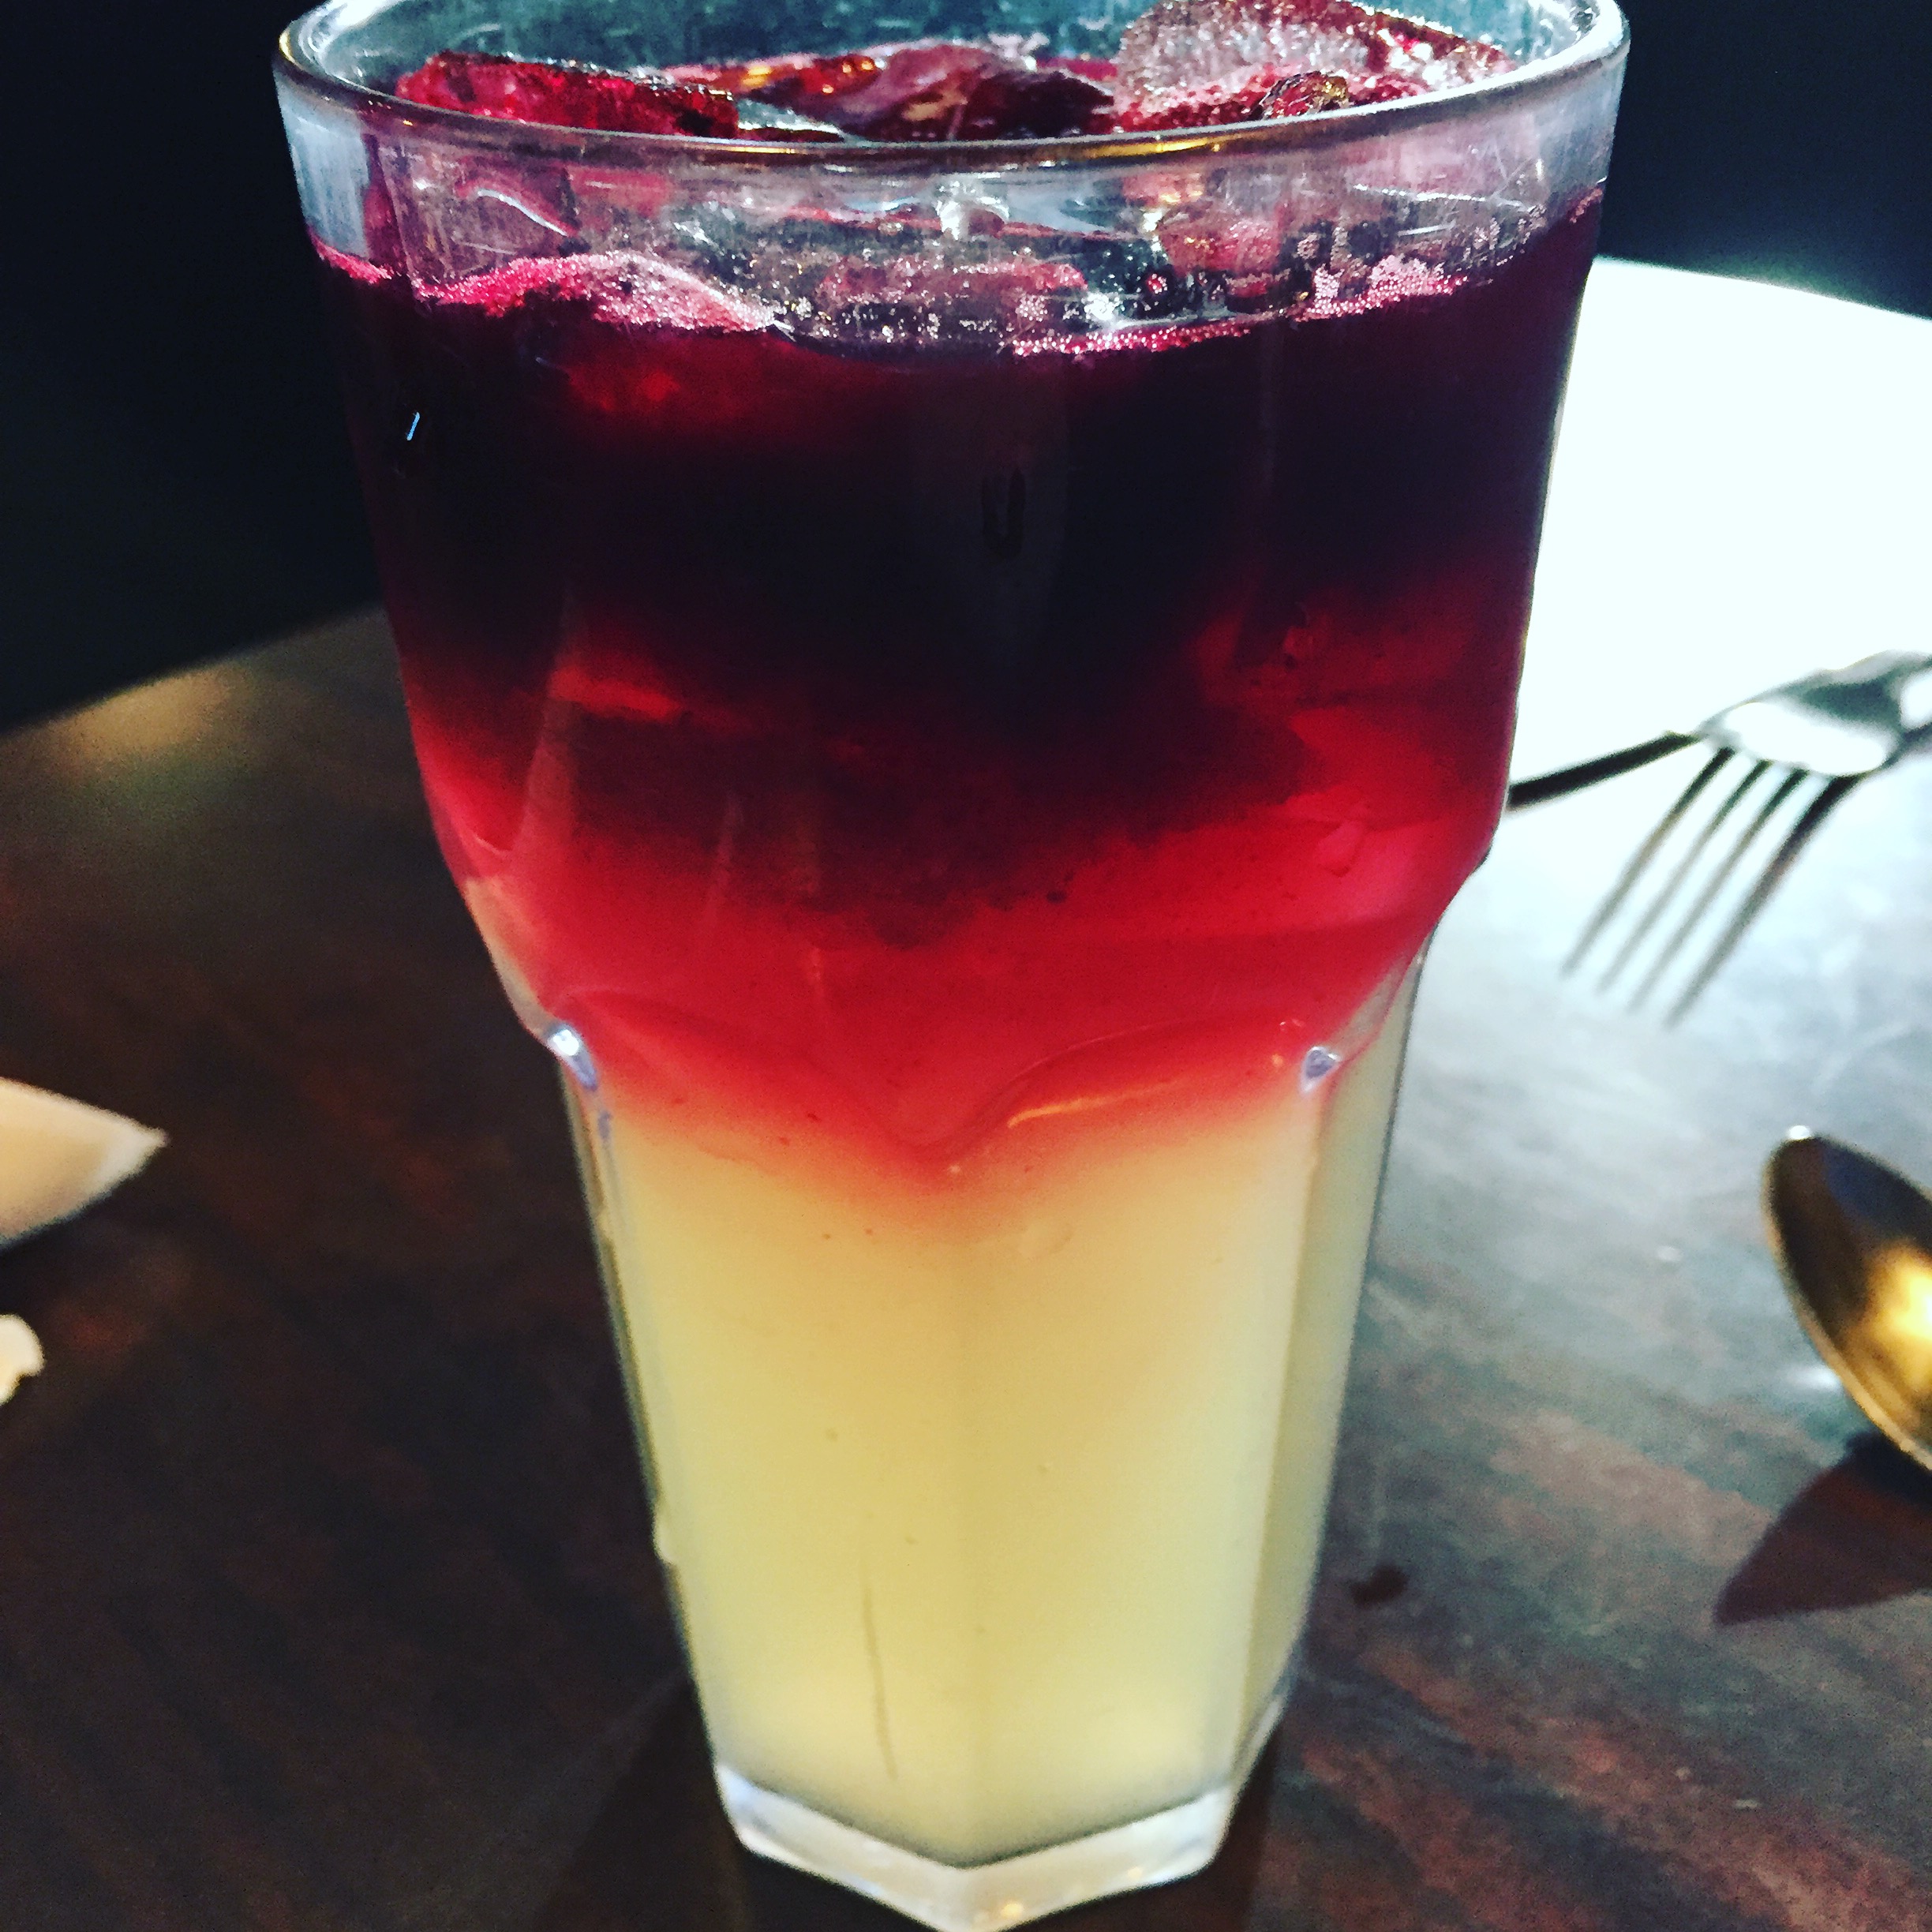 a glass of liquid with a red and white liquid in it